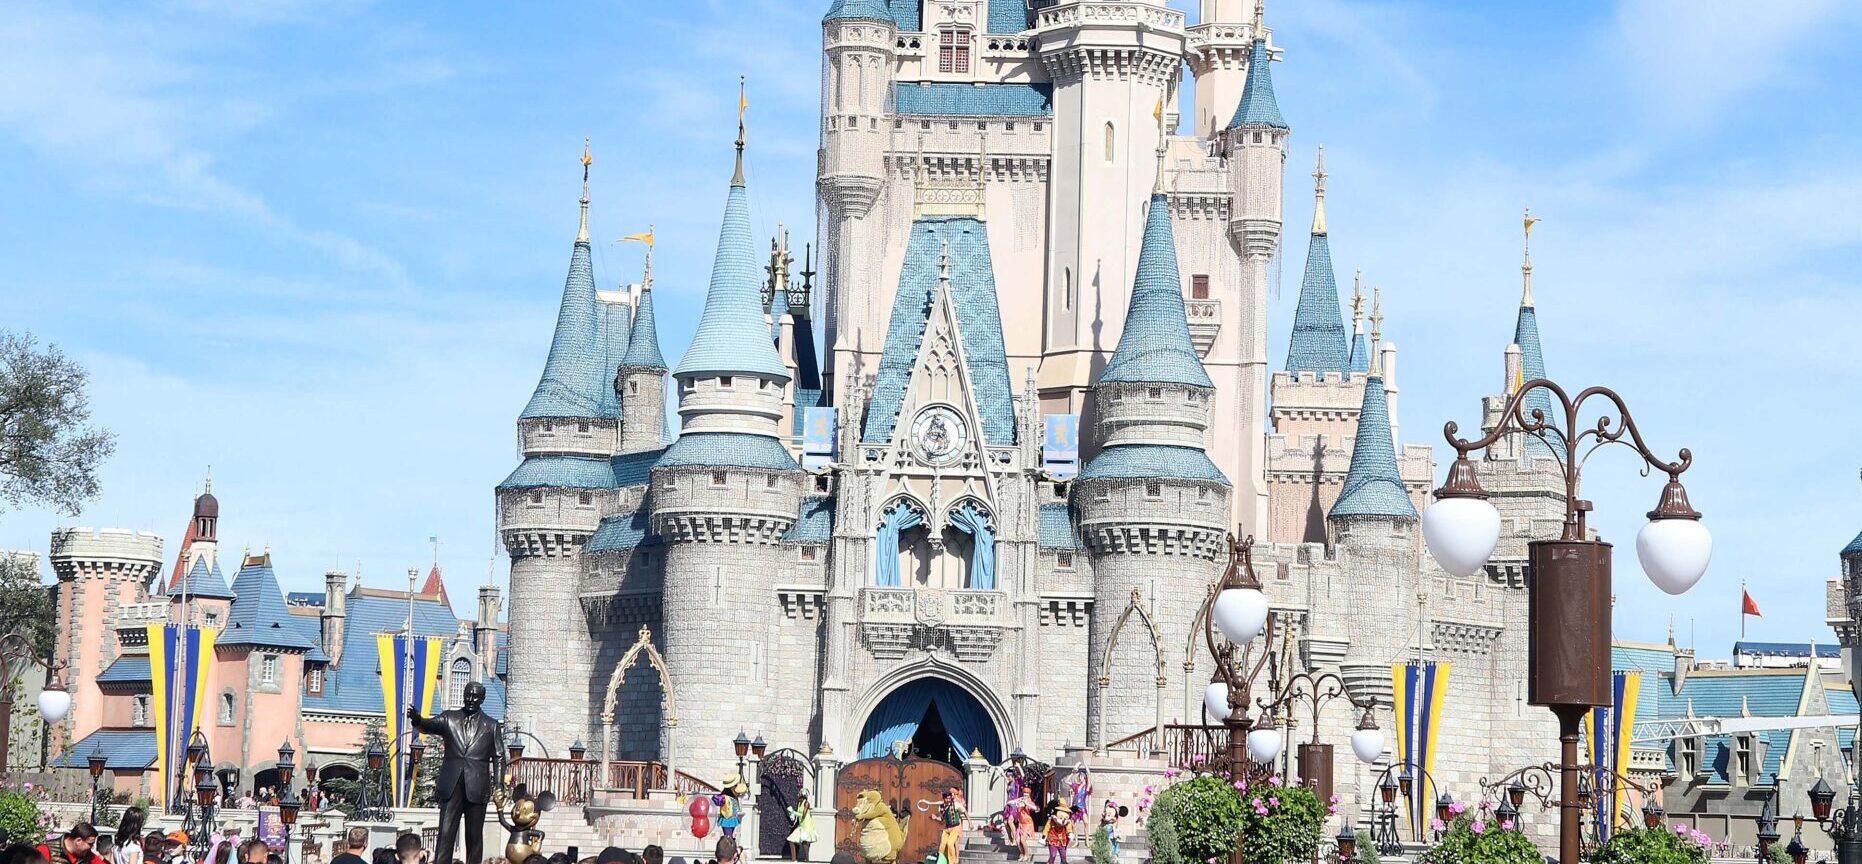 Disney Fires Worker After Video Shows Racial Altercation With Guest